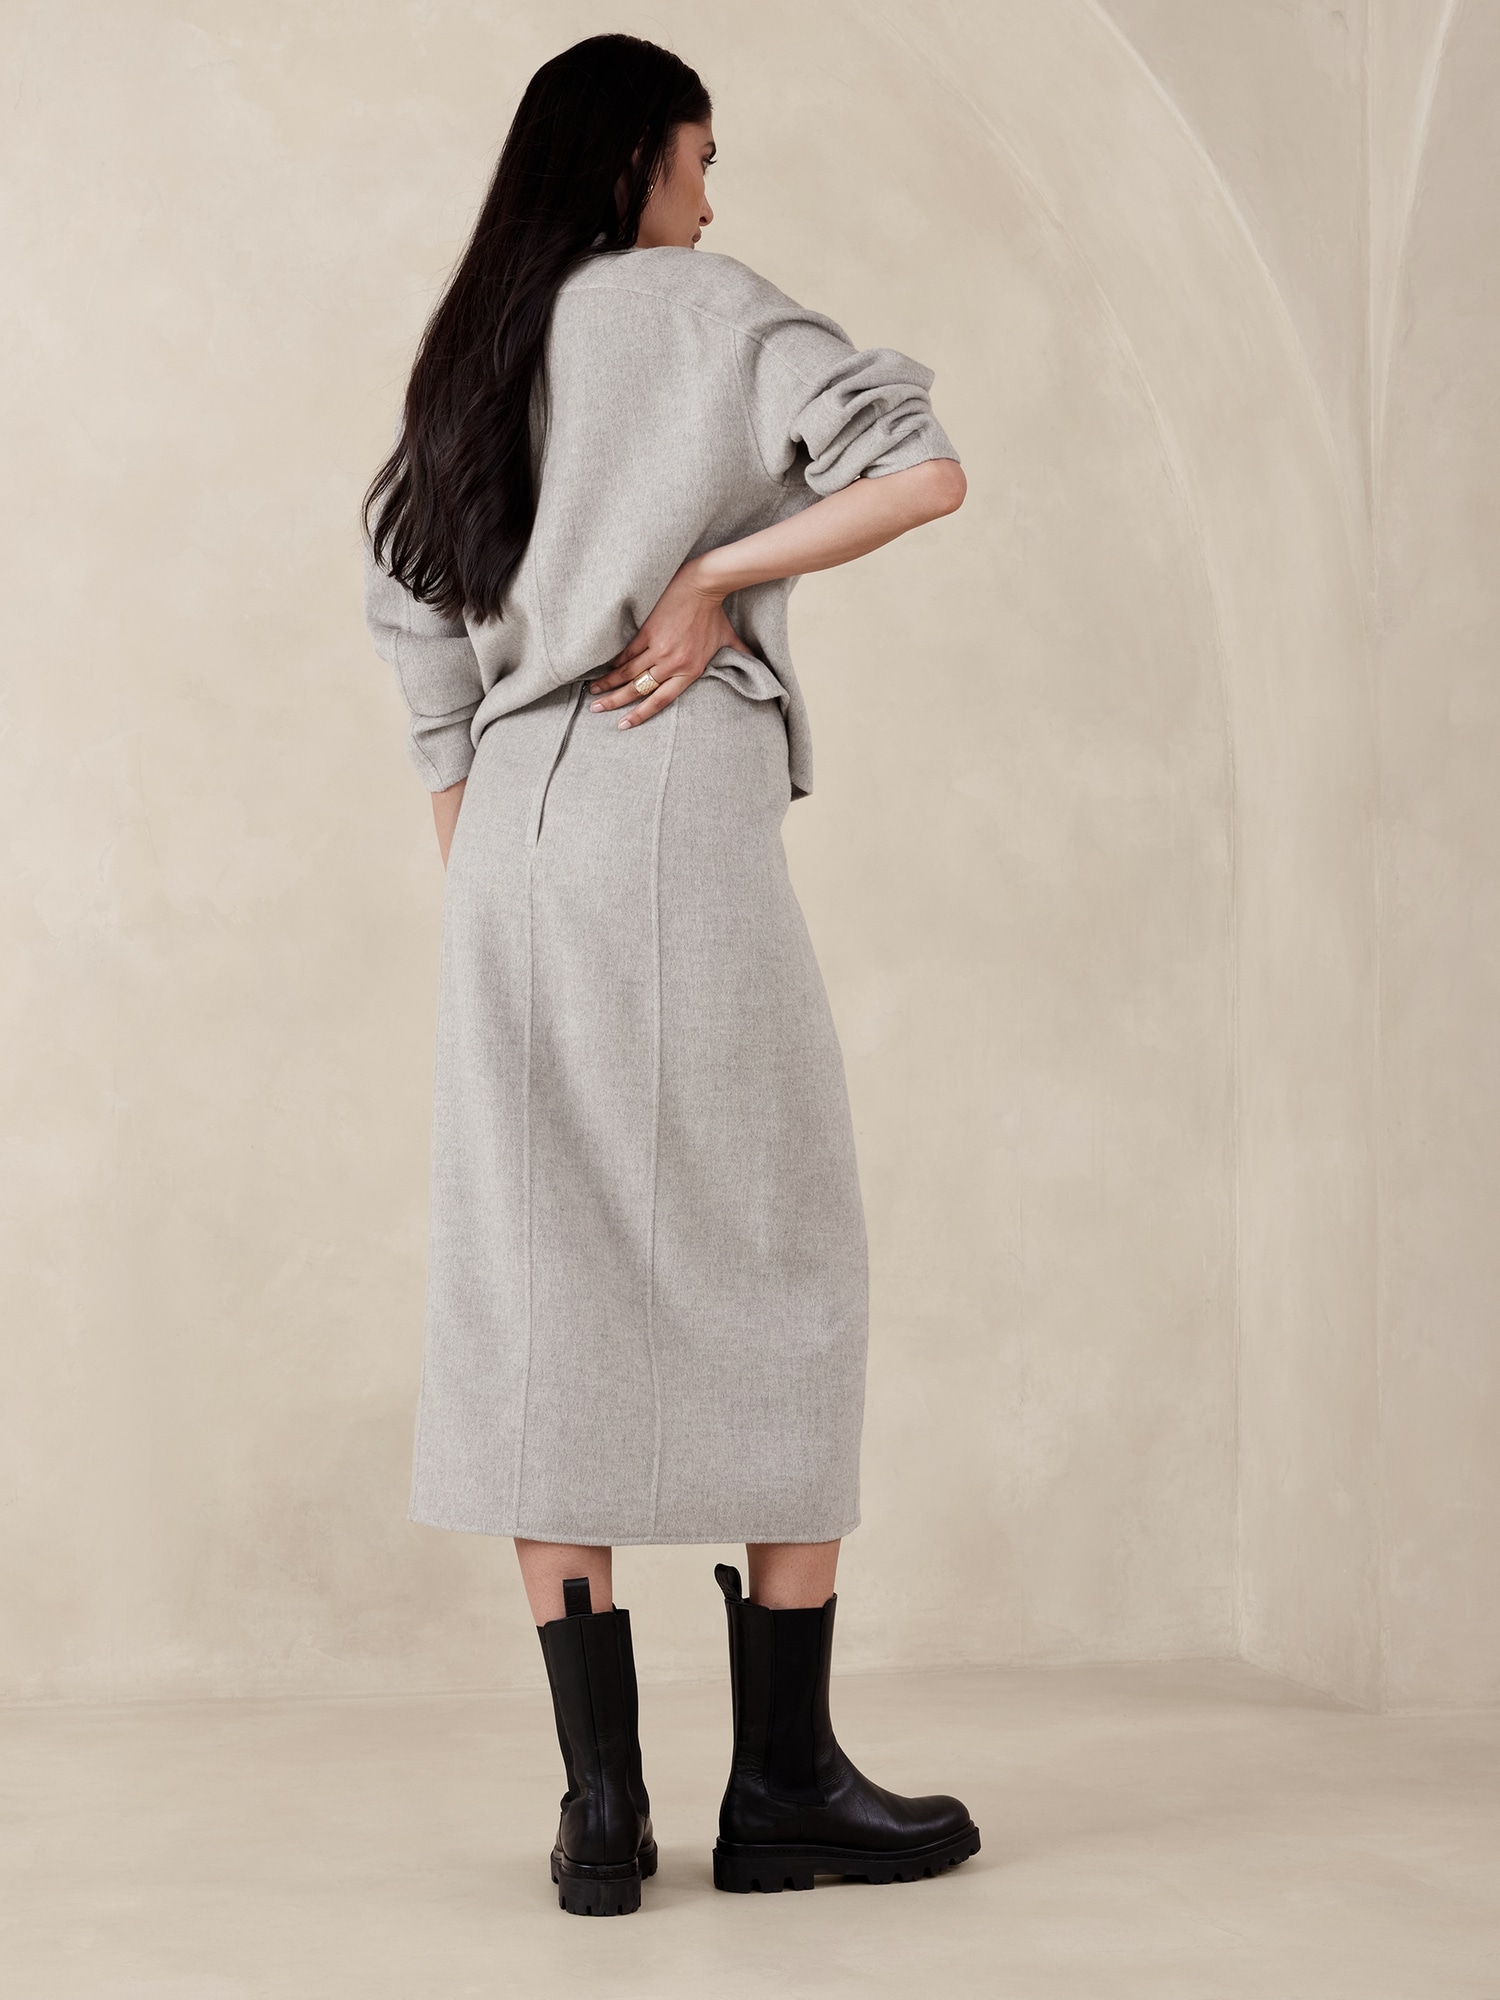 Shop the Latest in Women's Fashion Wool blend skirt